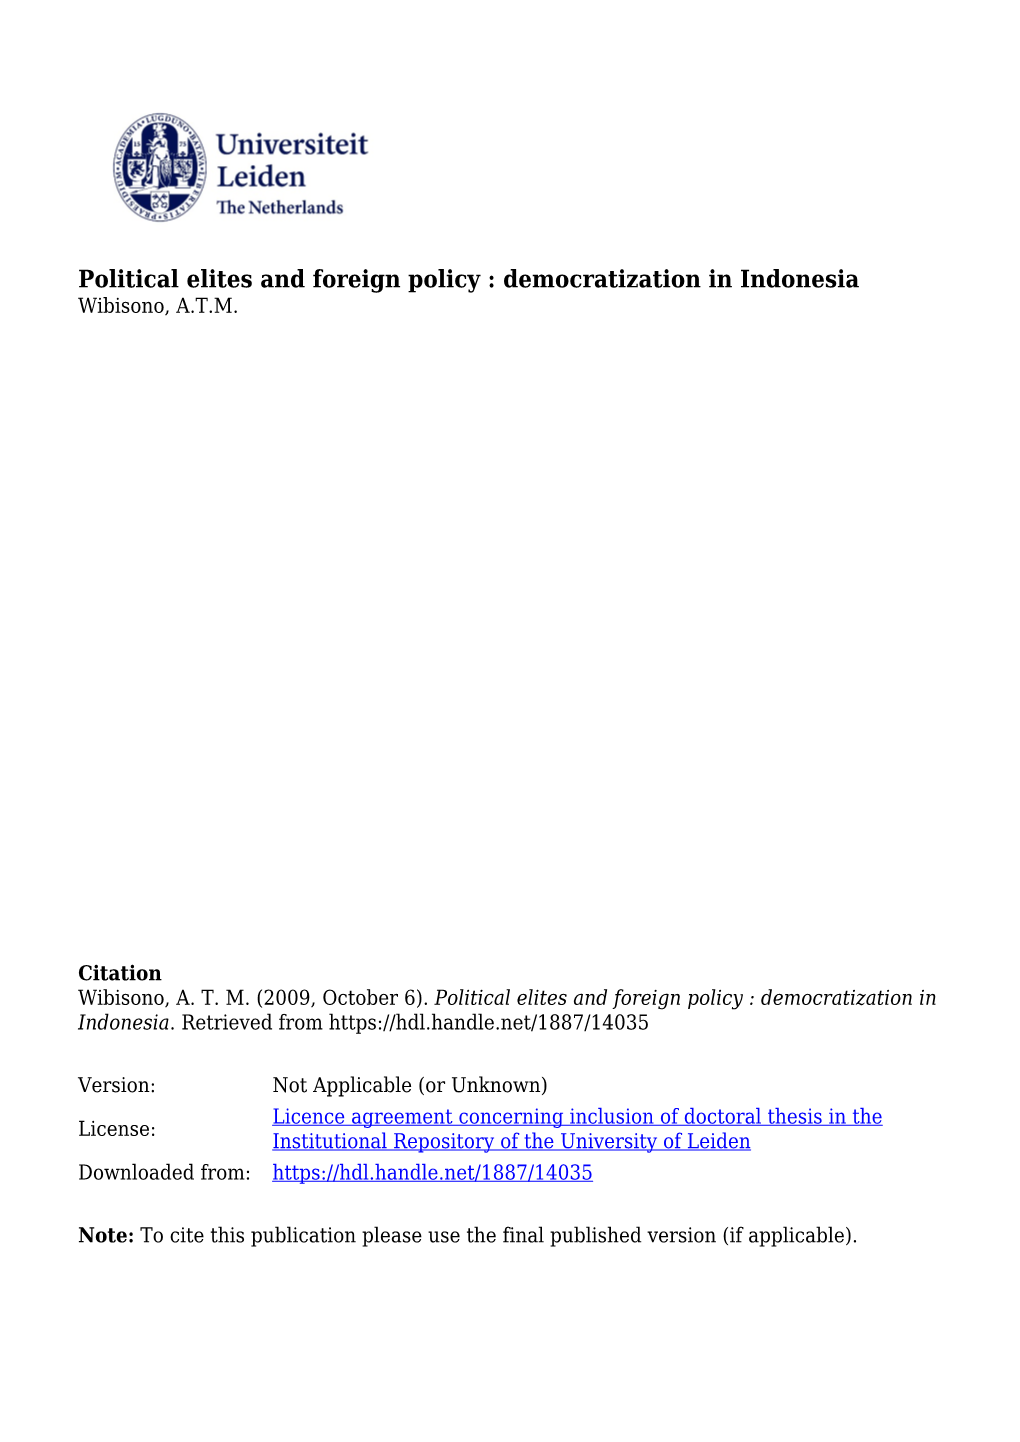 Political Elites and Foreign Policy : Democratization in Indonesia Wibisono, A.T.M